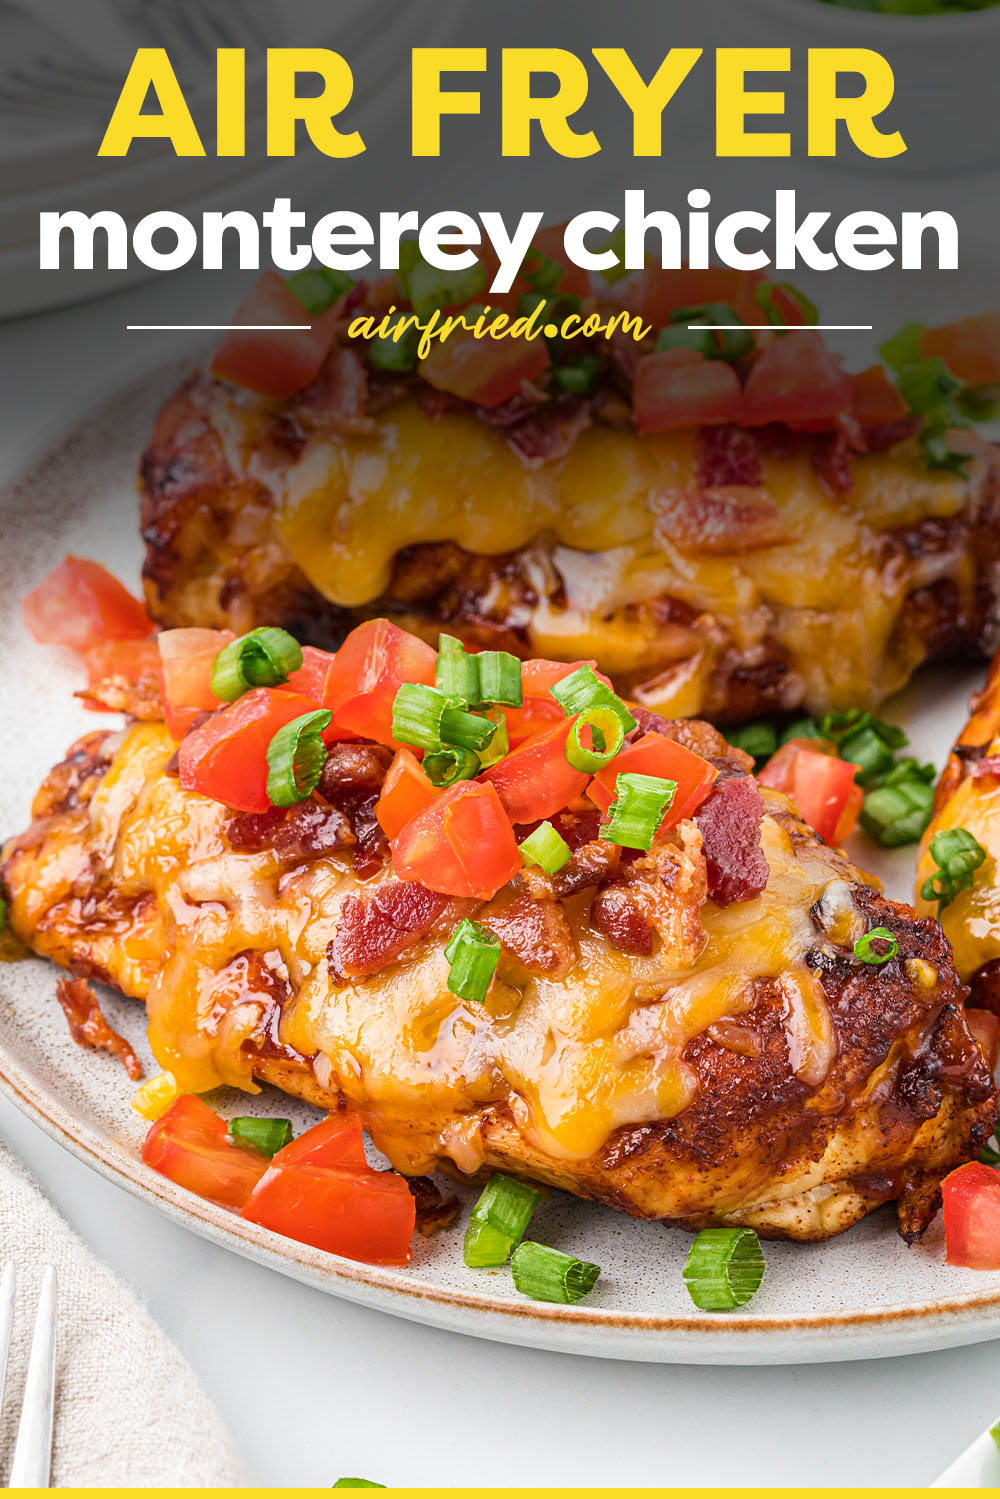 Air Fryer Monterey Chicken is an easy homemade copycat version of a Chili's classic. This cheesy, saucy, tender and juicy chicken is topped with your favorite BBQ sauce, Colby Jack cheese, bacon, diced tomato and green onion - all cooked in the air fryer in just 15 minutes!